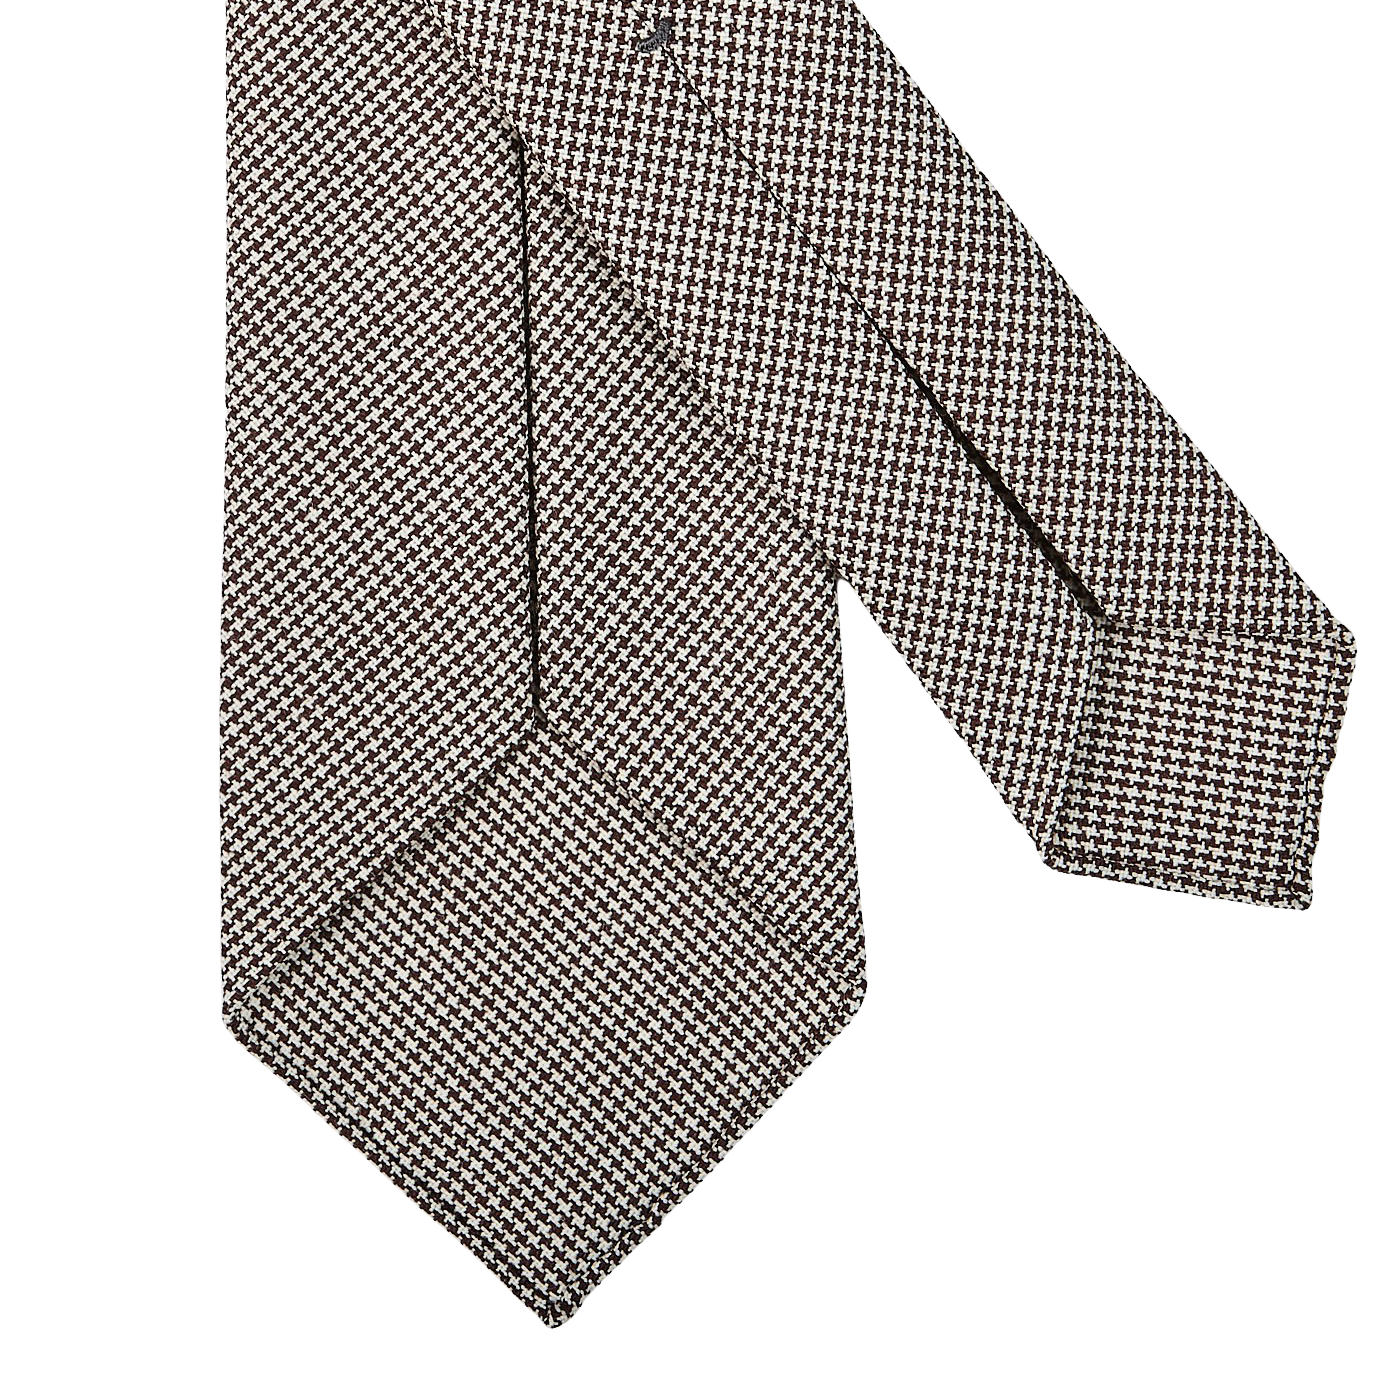 Dreaming of Monday Brown Houndstooth 7-Fold High Twist Wool Tie Back